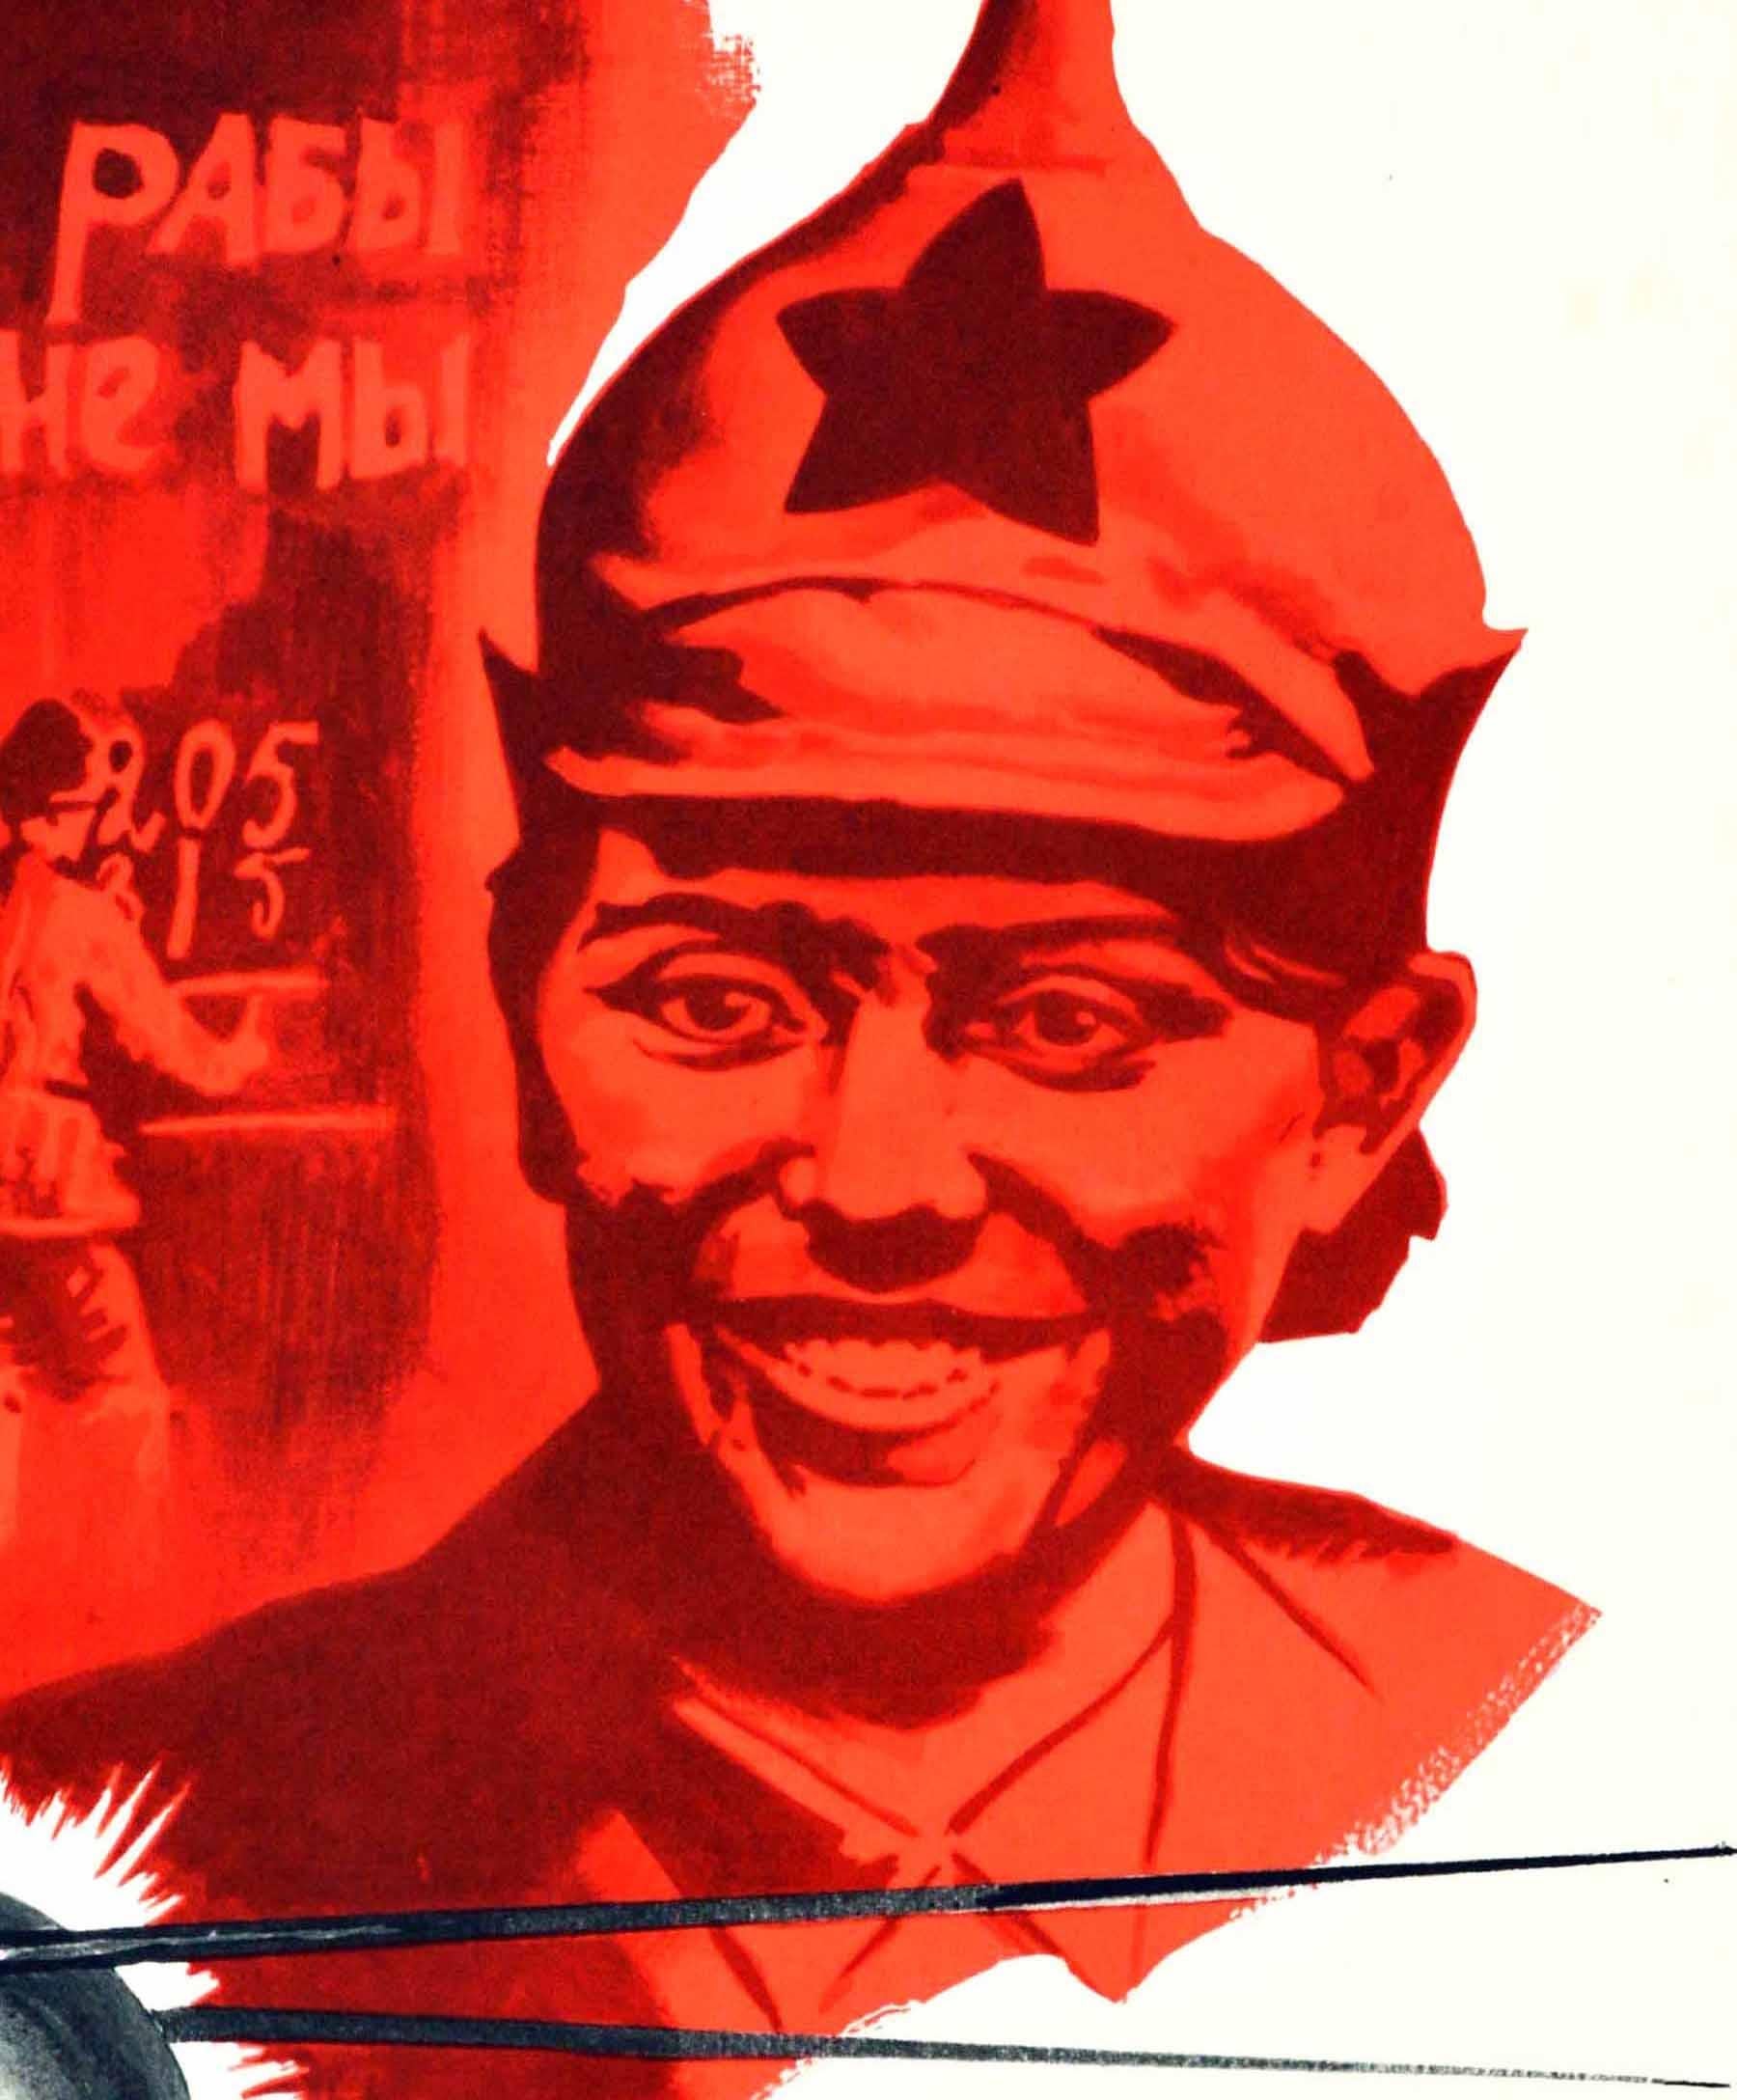 Original vintage Soviet propaganda poster - We are not slaves We were born to make a fairy tale come true - featuring an illustration in shades of red depicting a smiling army soldier holding a Sputnik satellite in metallic grey on his hand with